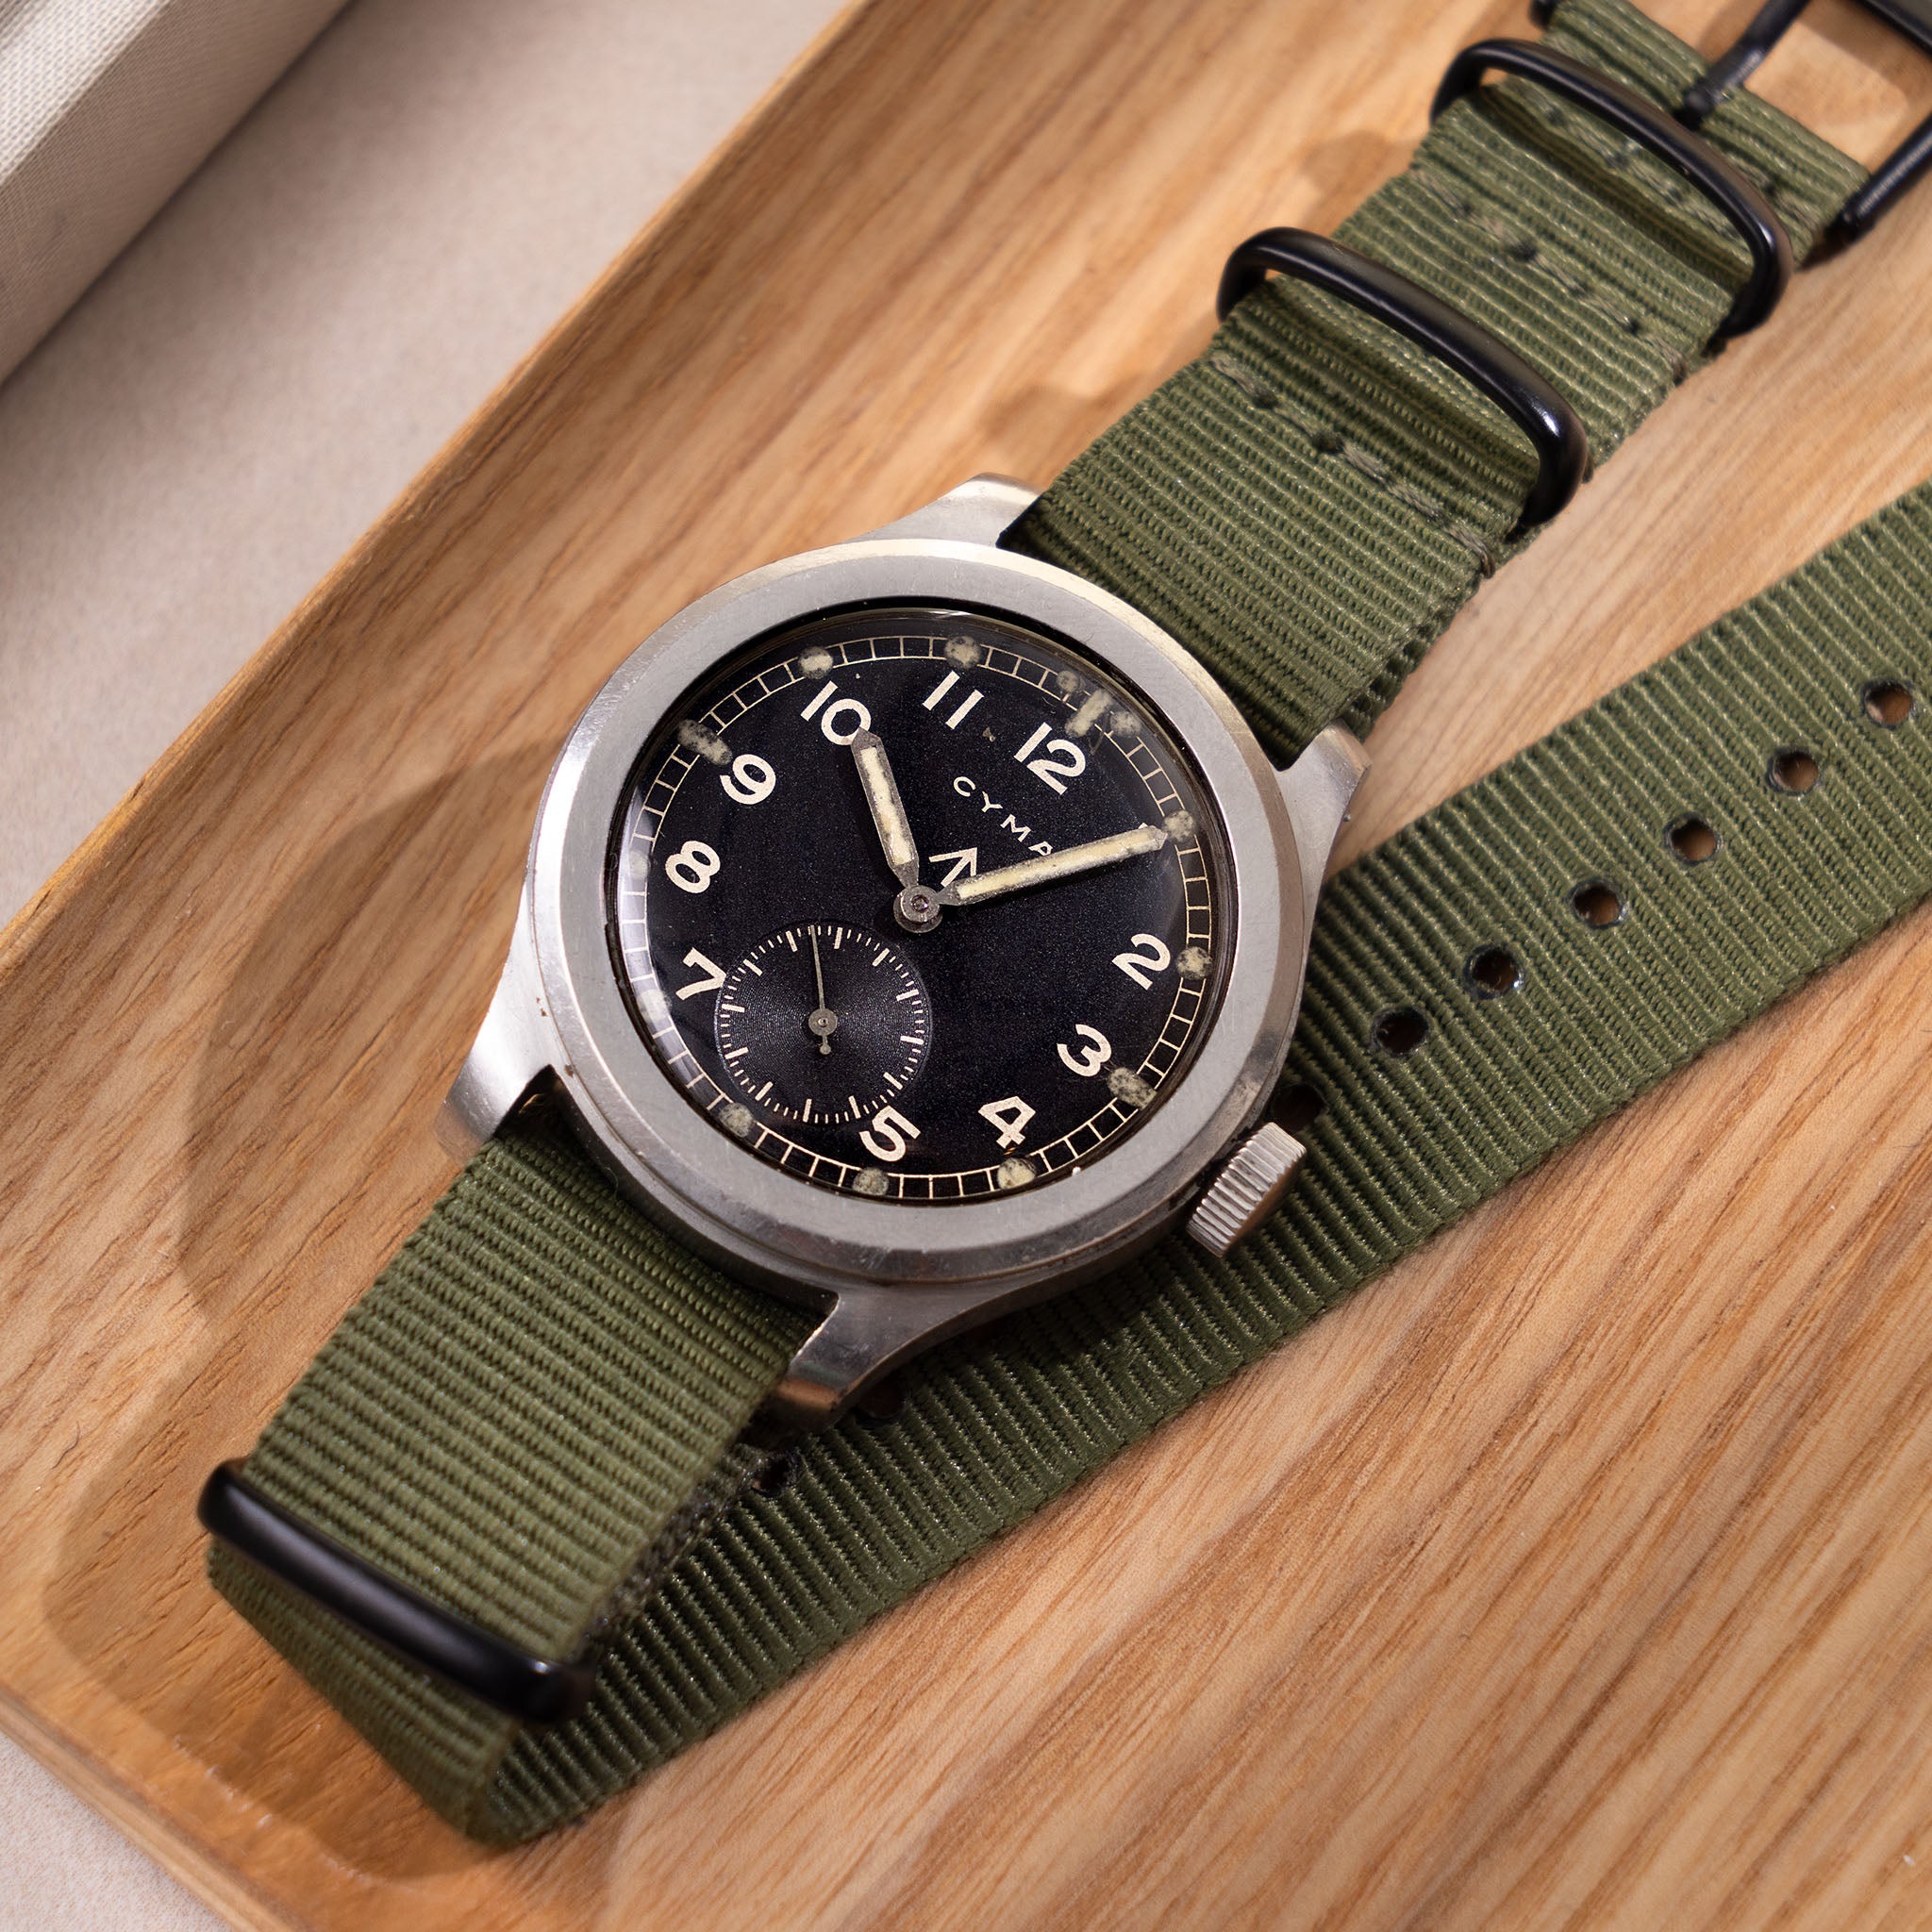 Cyma Dirty Dozen Military Issued Watch - incoming